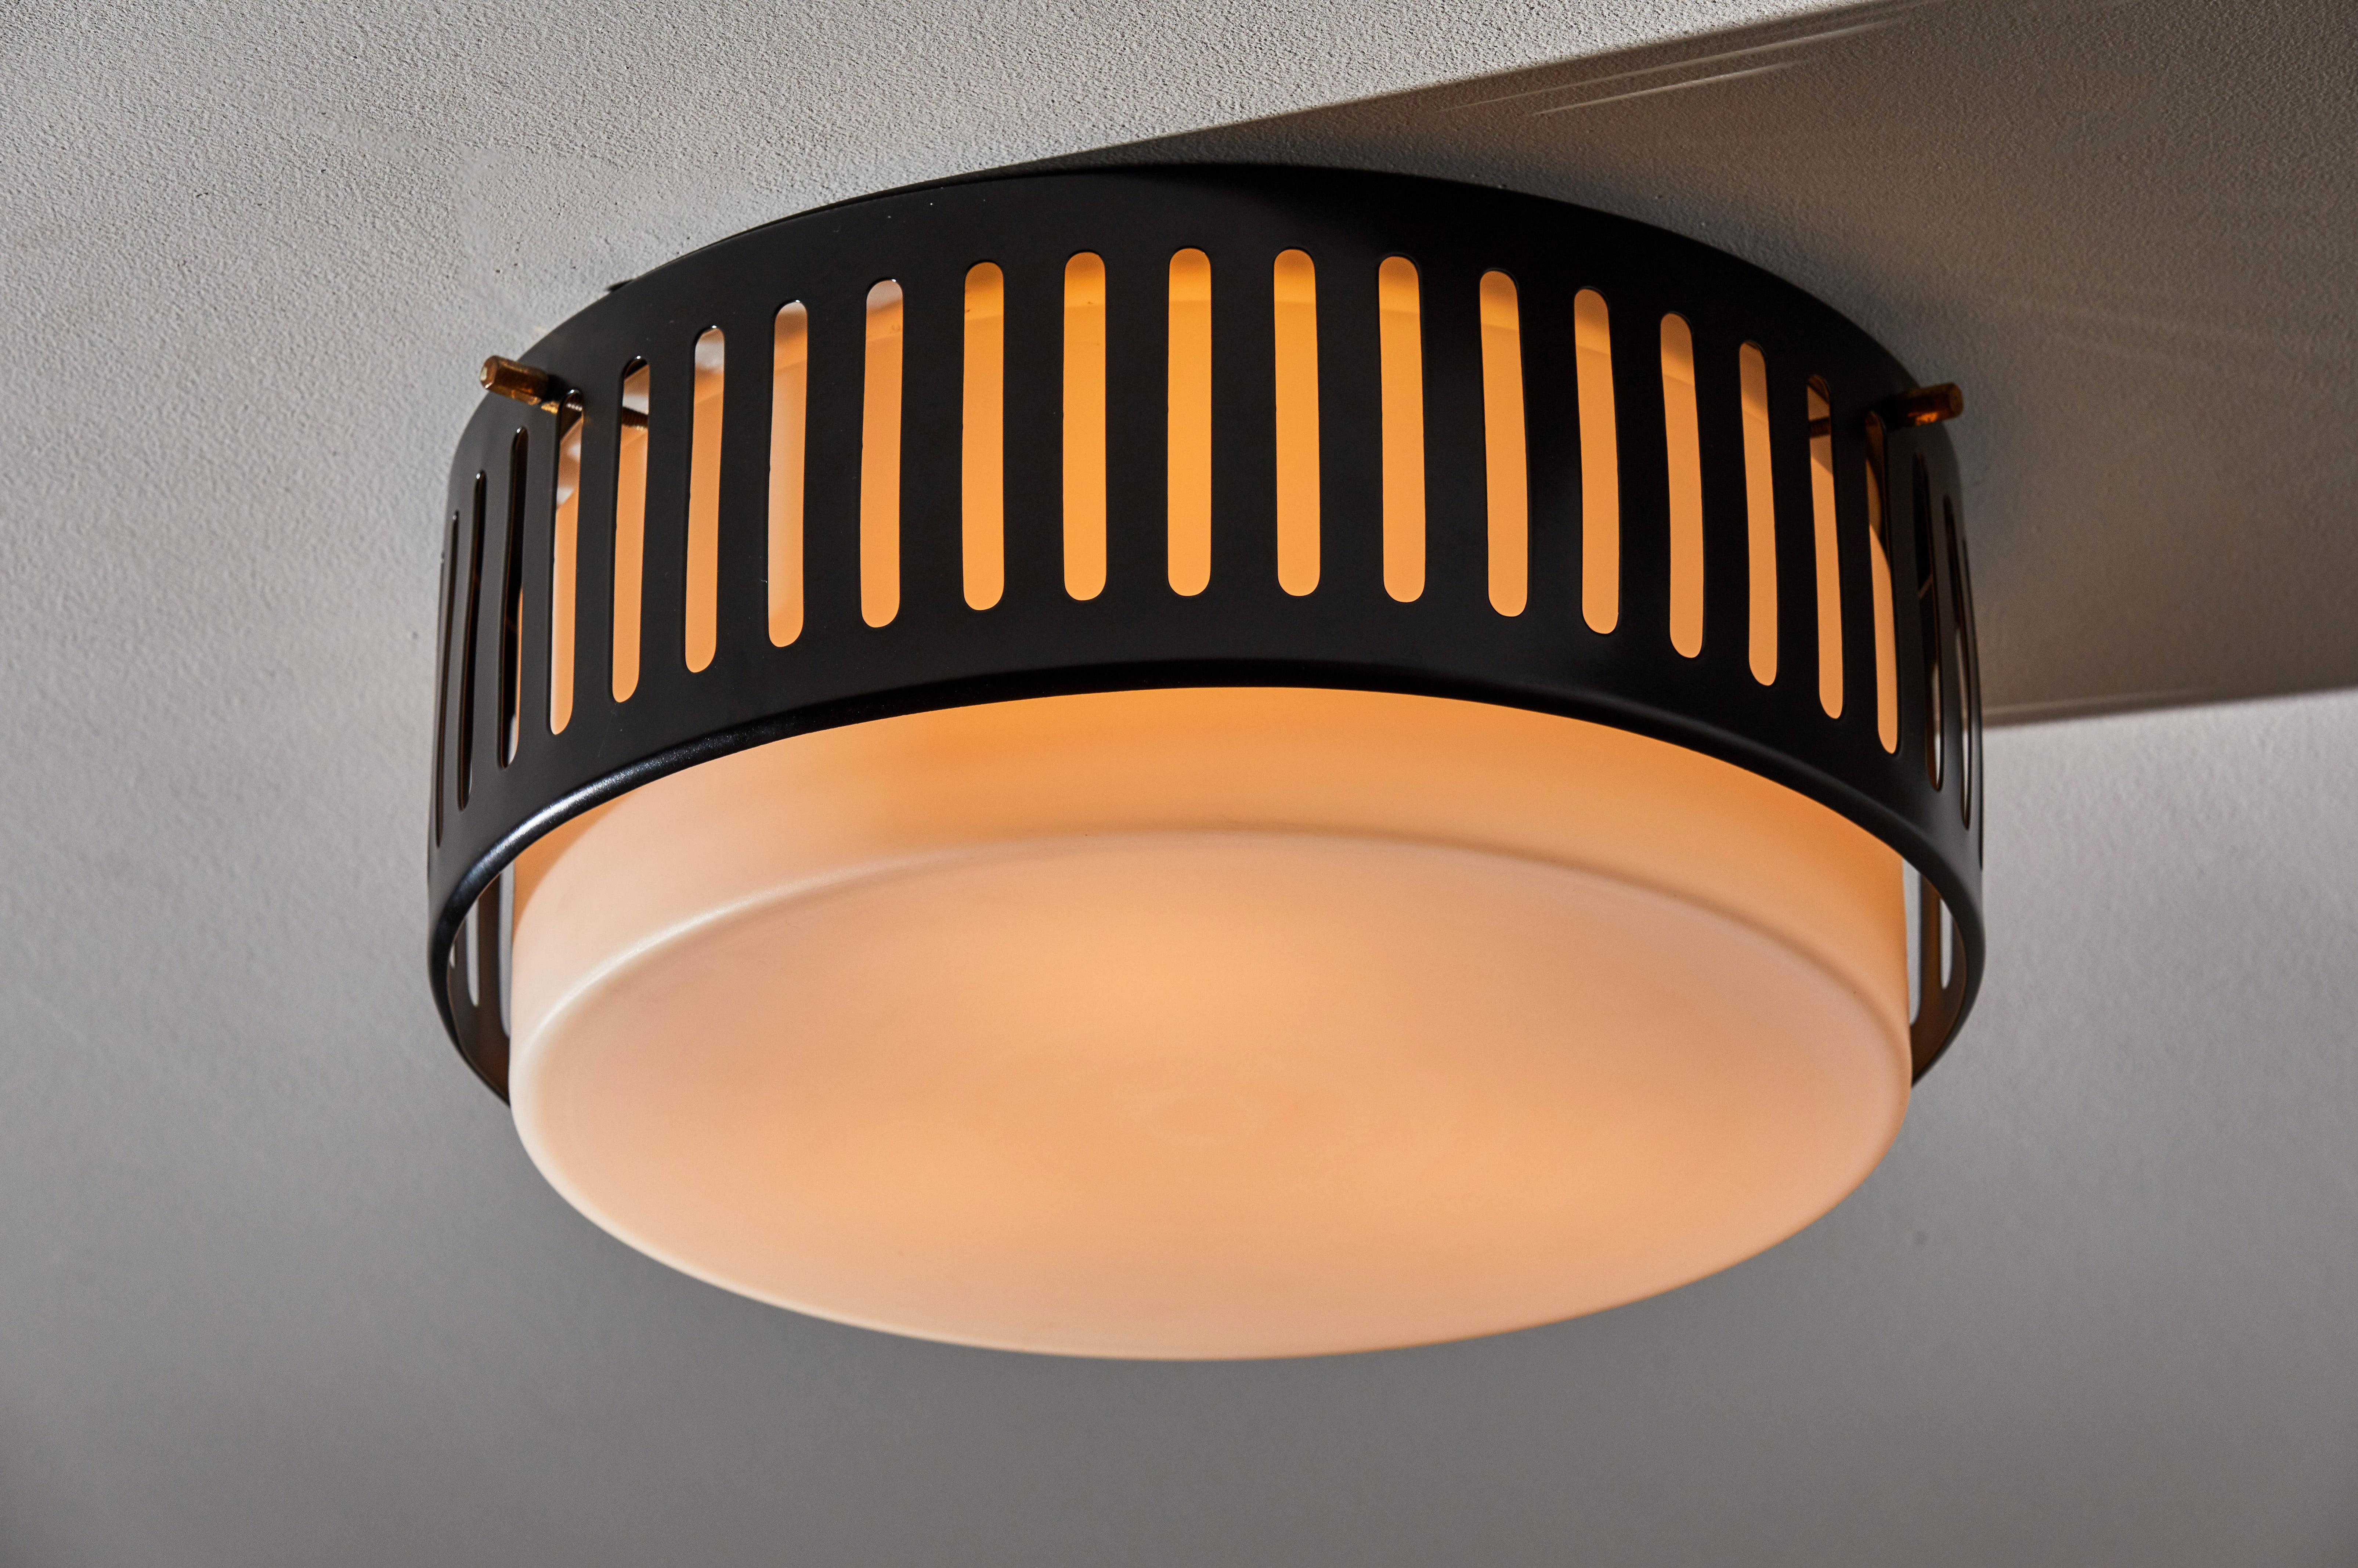 Flush mount ceiling light by Stilnovo. Designed and manufactured in Italy, circa 1950s. Rewired for US junction boxes. Brushed satin glass diffuser with enameled, perforated metal hardware. Quantity 2 available. Takes three E27 60W maximum bulbs.